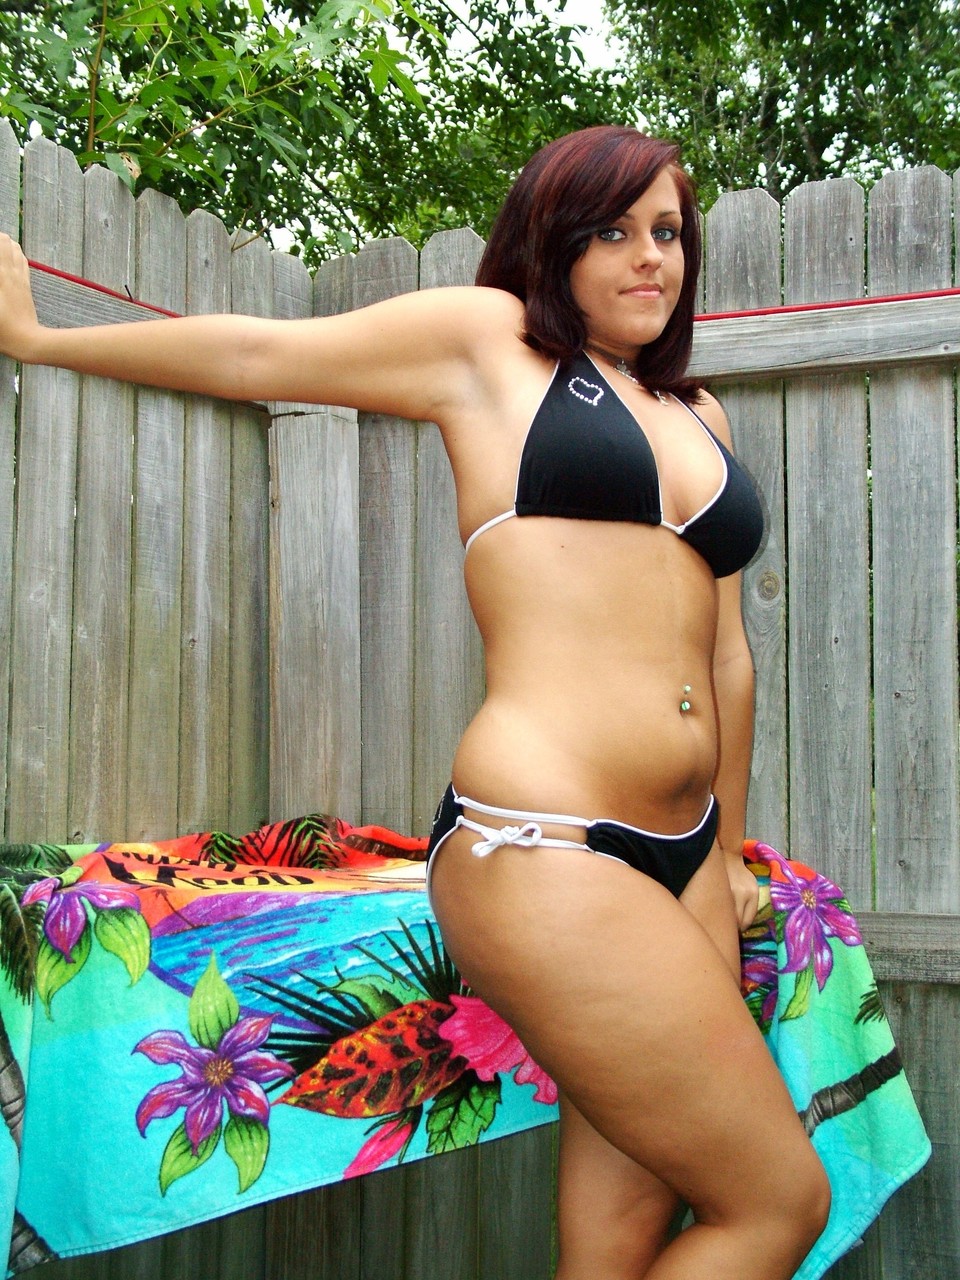 Chubby amateur teen Roxy displays her huge juggs and poses in the back yard 色情照片 #425617654 | Teen Girl Photos Pics, Amateur, 手机色情